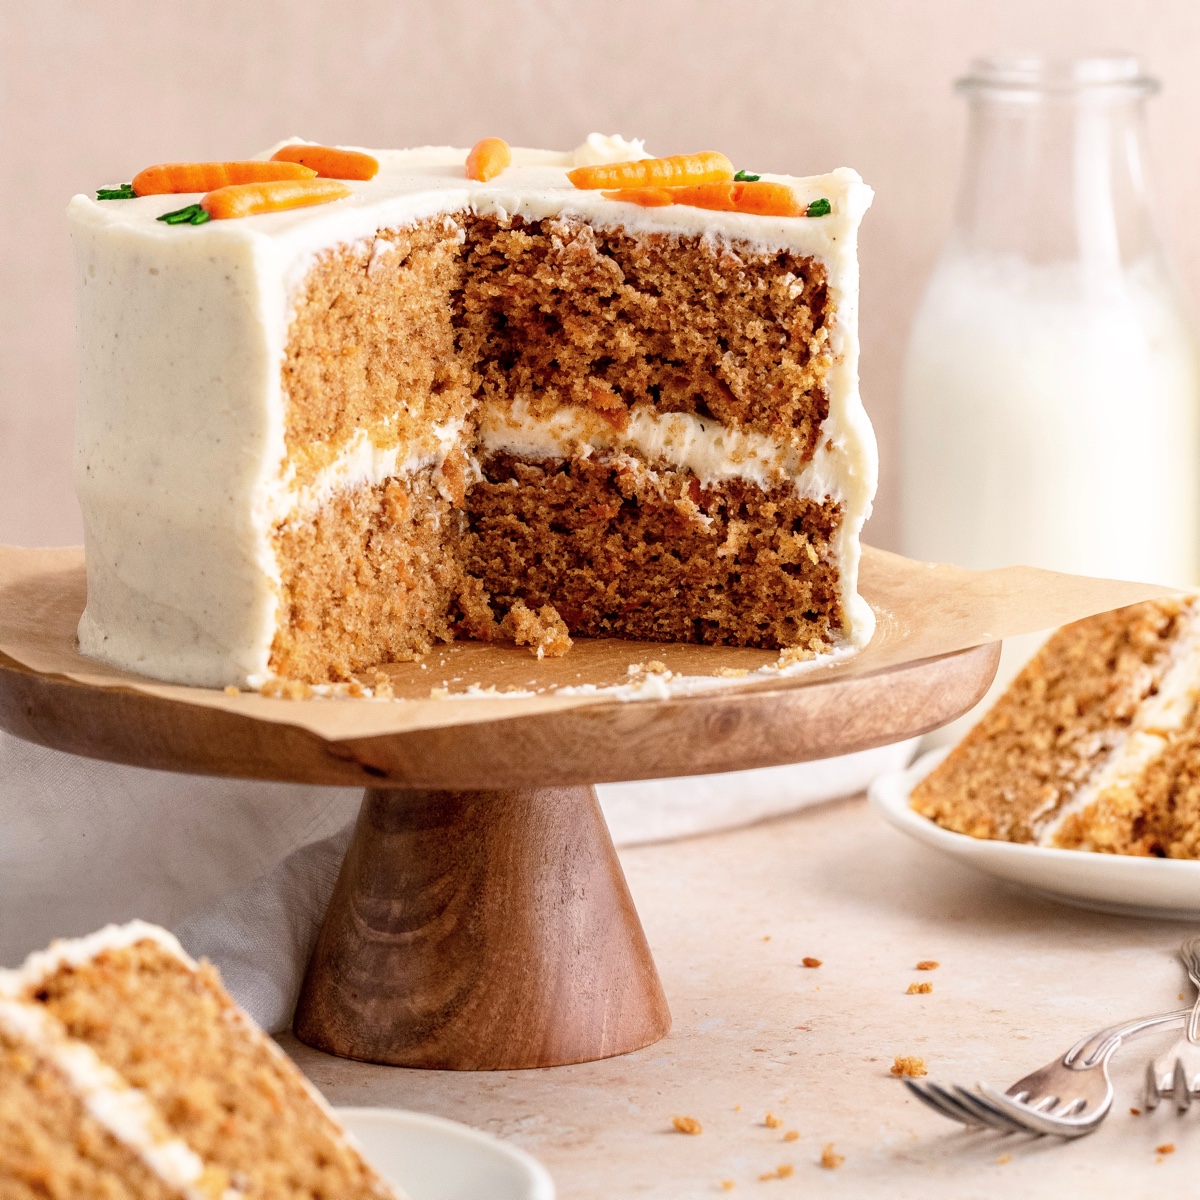 The Best Gluten-Free Carrot Cake with Pineapple: Easy Recipe!